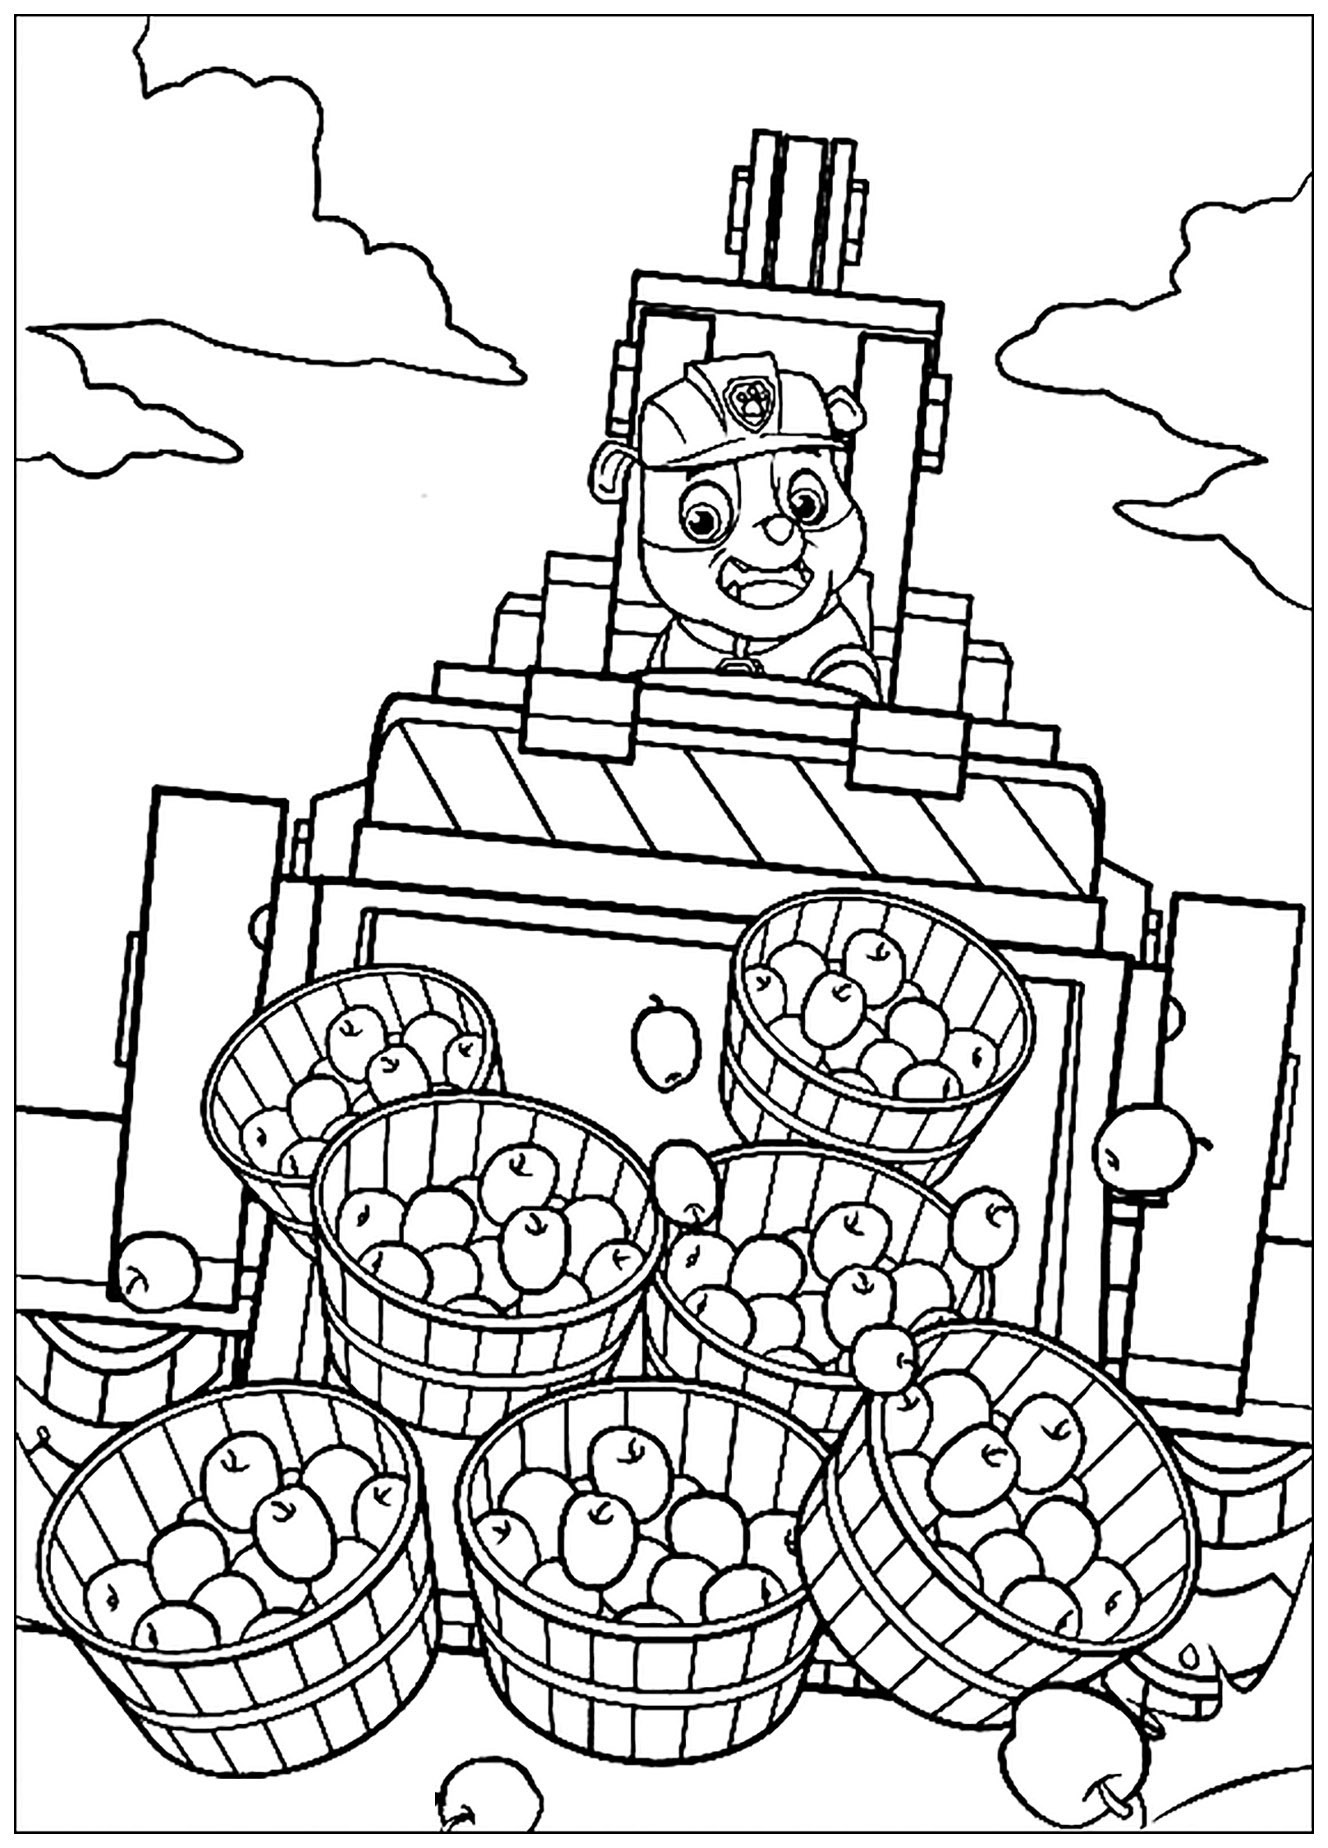 Simple Patrol coloring pages for kids